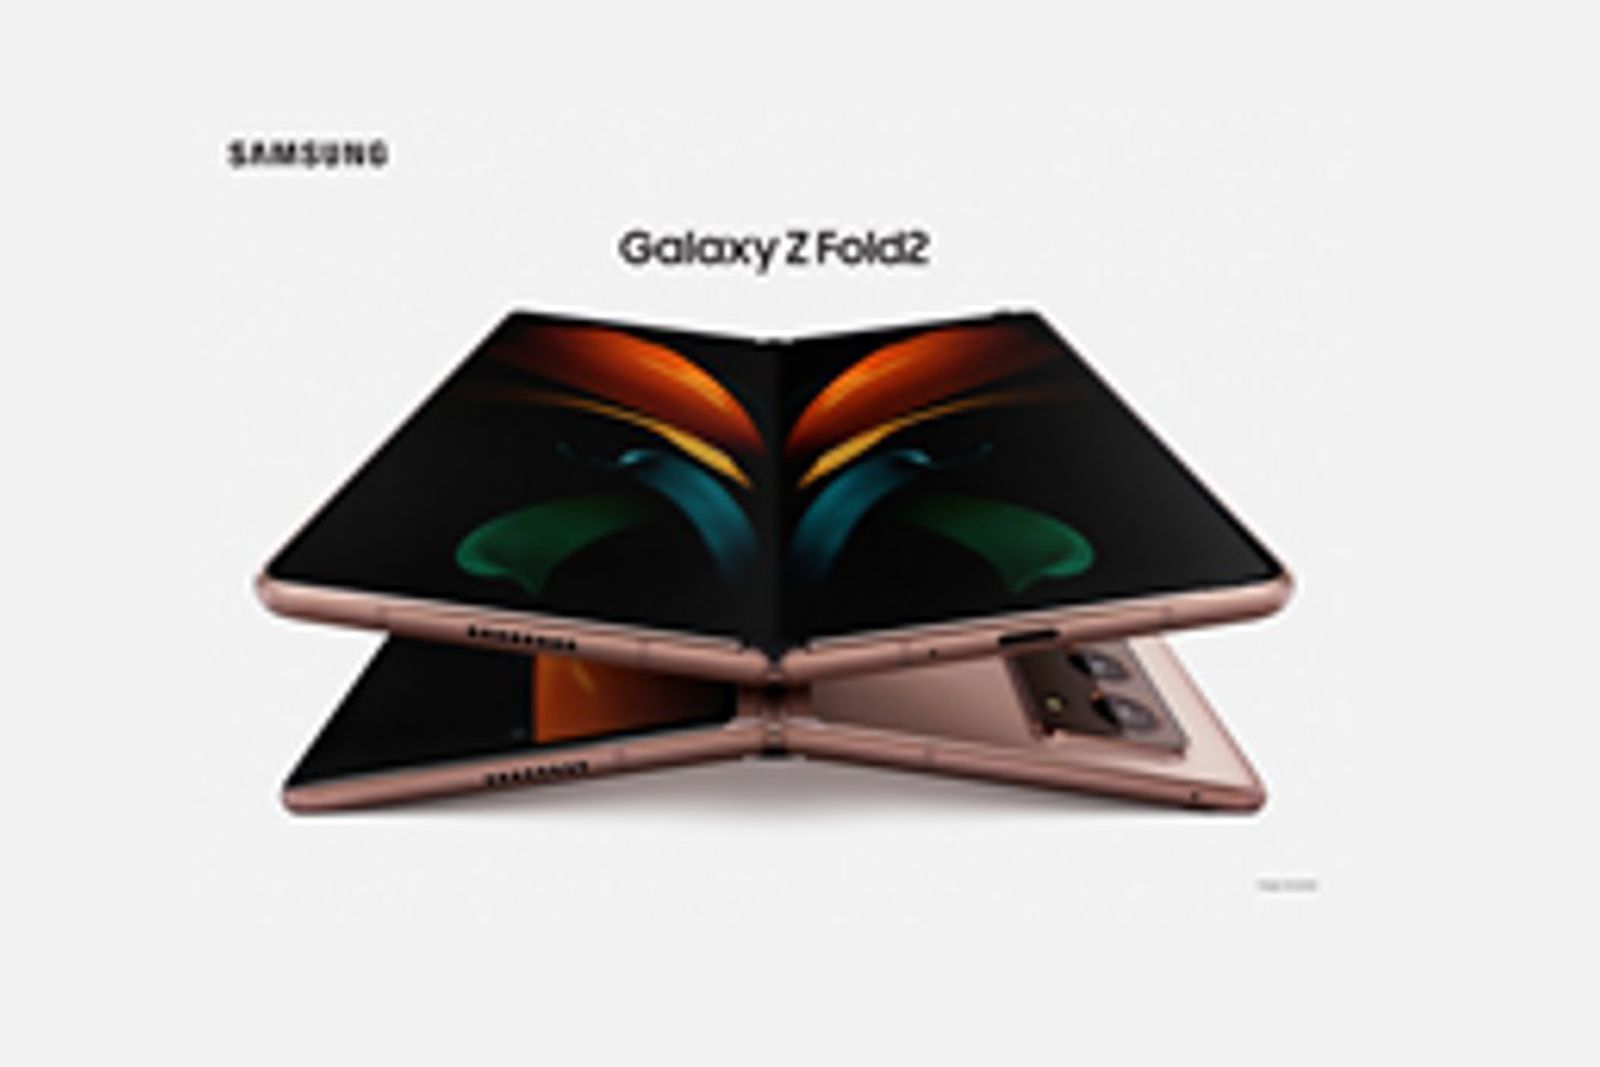 Samsung Galaxy Z Fold 2 photo leak shows copper finish and seemingly larger external display photo 1